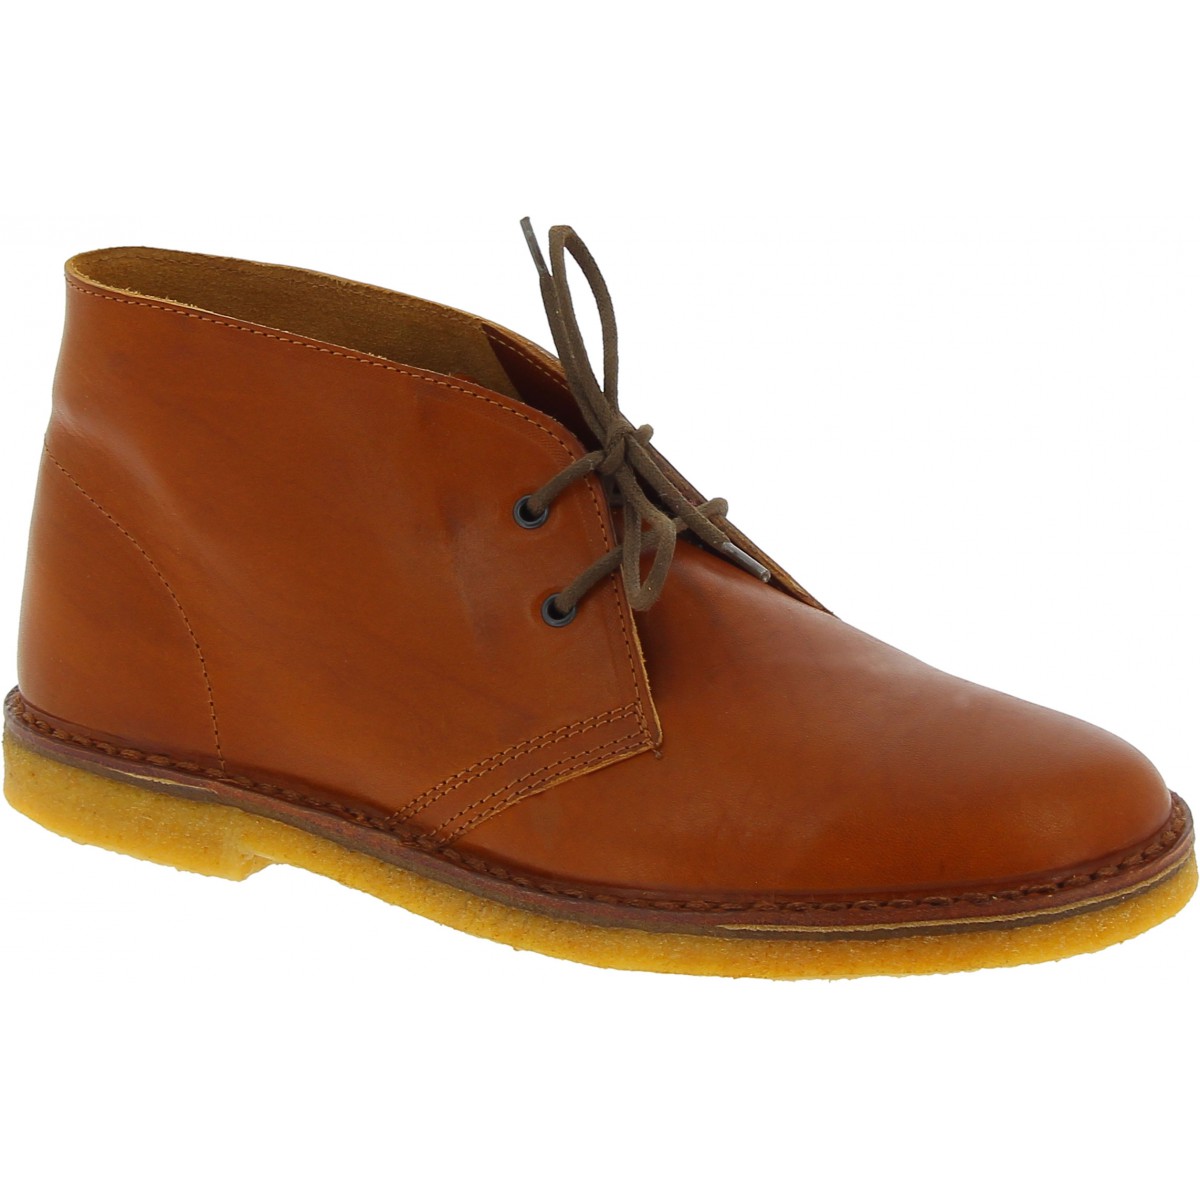 Women's tan leather chukka boots handmade in Italy | The craftsmen